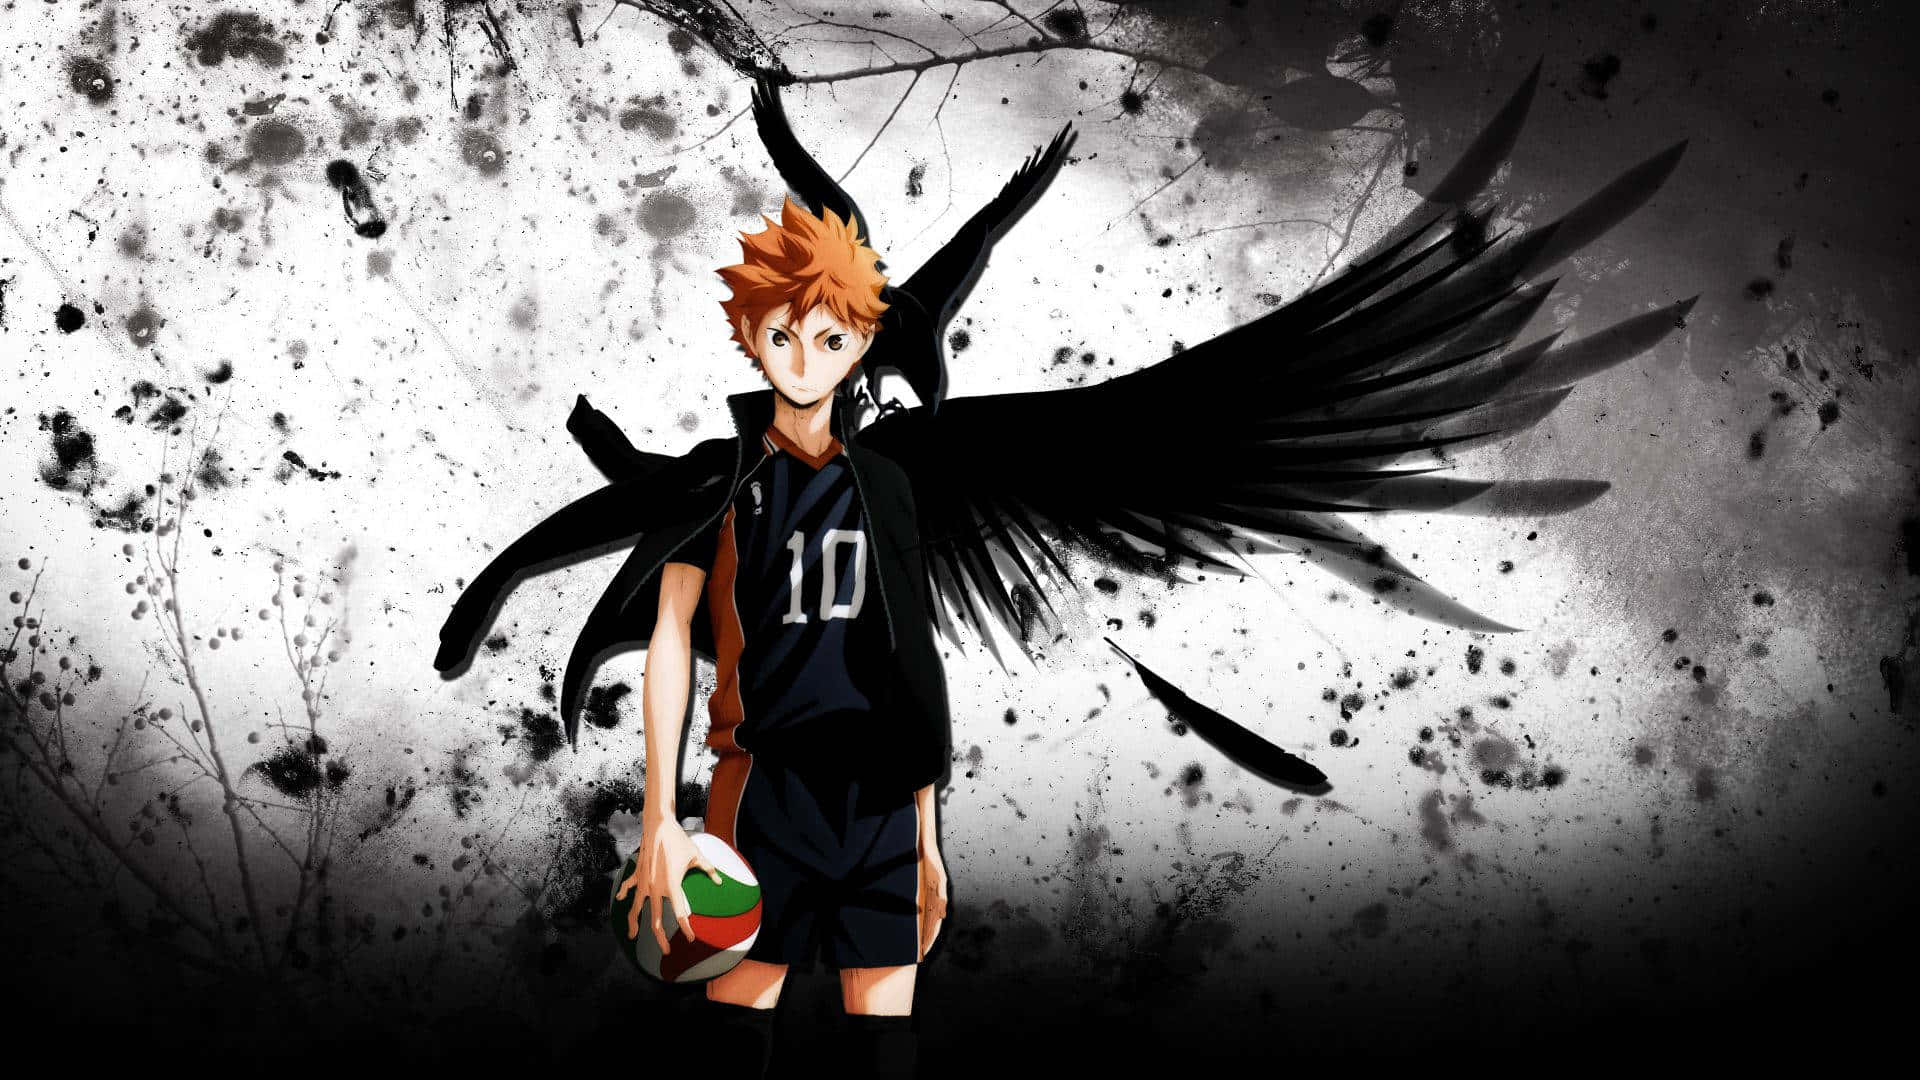 Feel energized with this Haikyuu Aesthetic Desktop Wallpaper